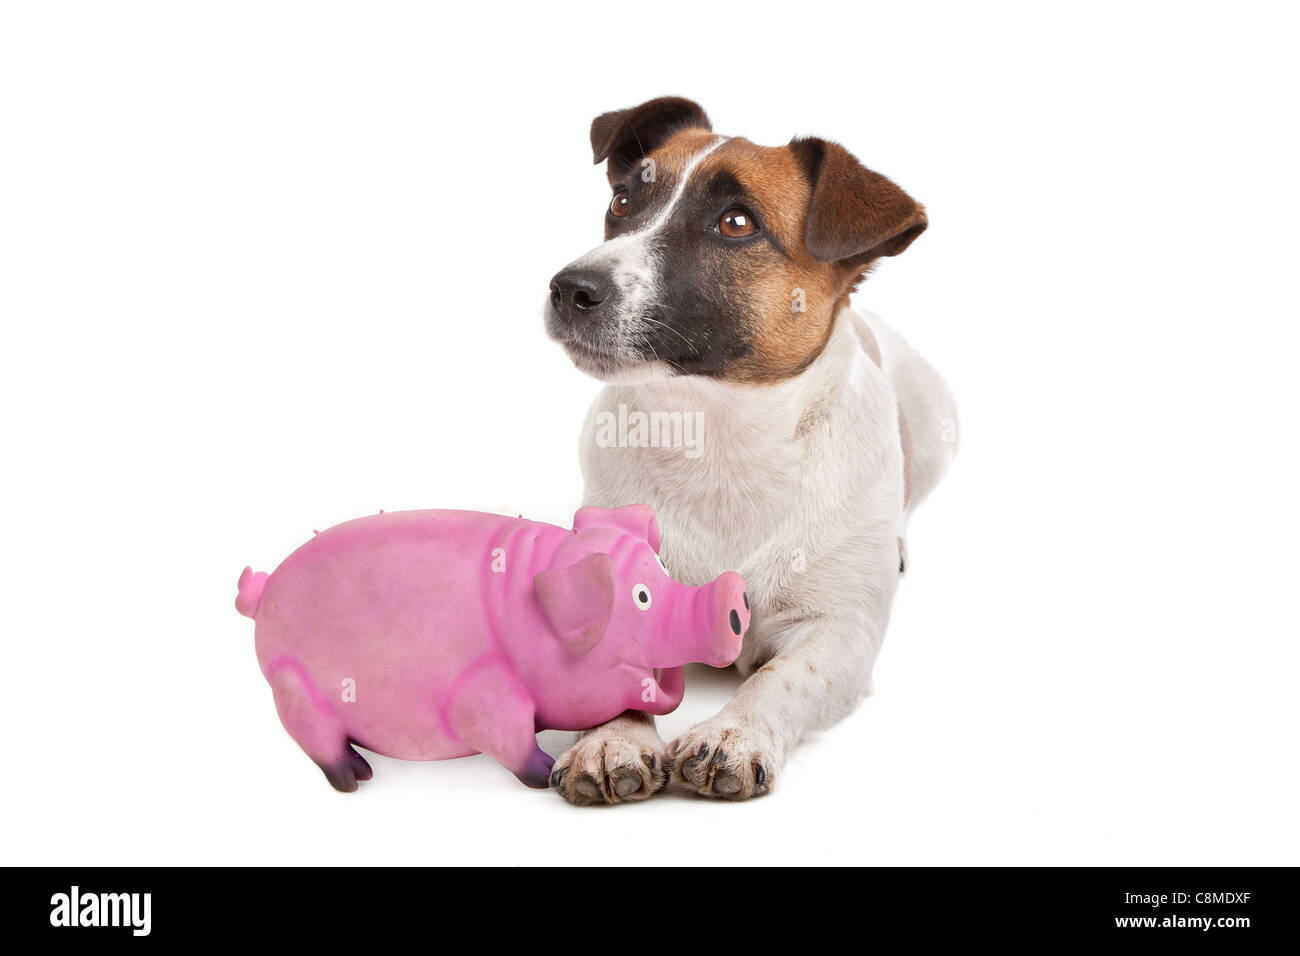 Jack Russel Terrier in front of a white background Stock Photo